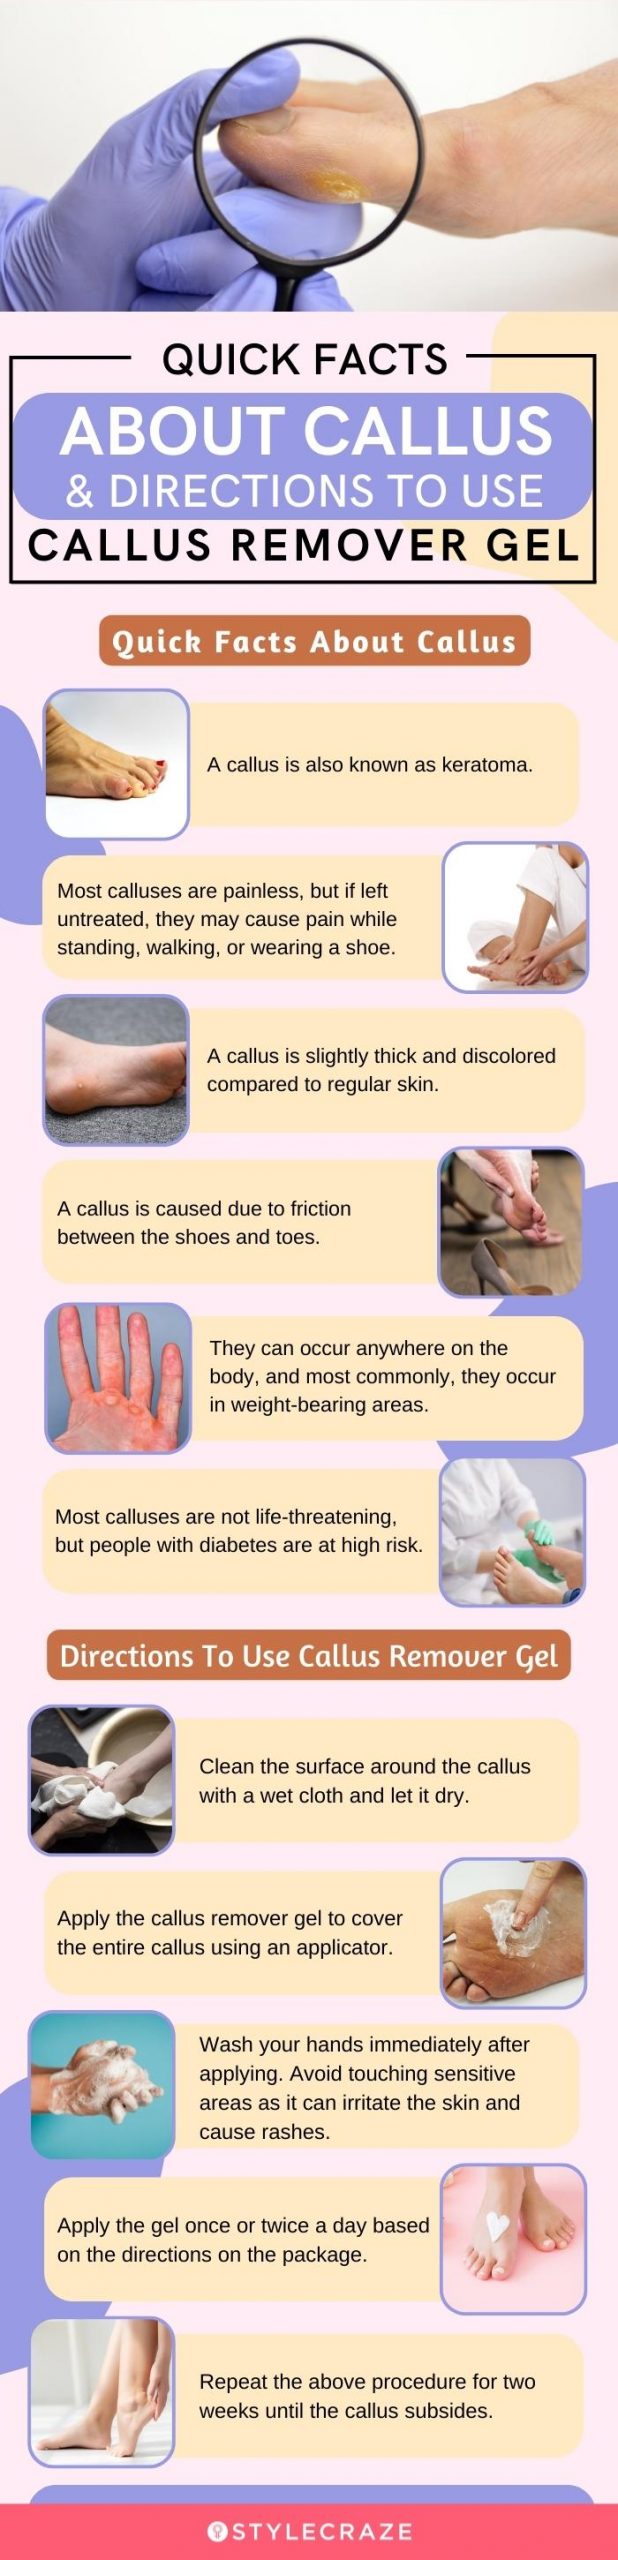 Quick Facts About Callus And Directions To Use Callus Remover Gel (infographic)